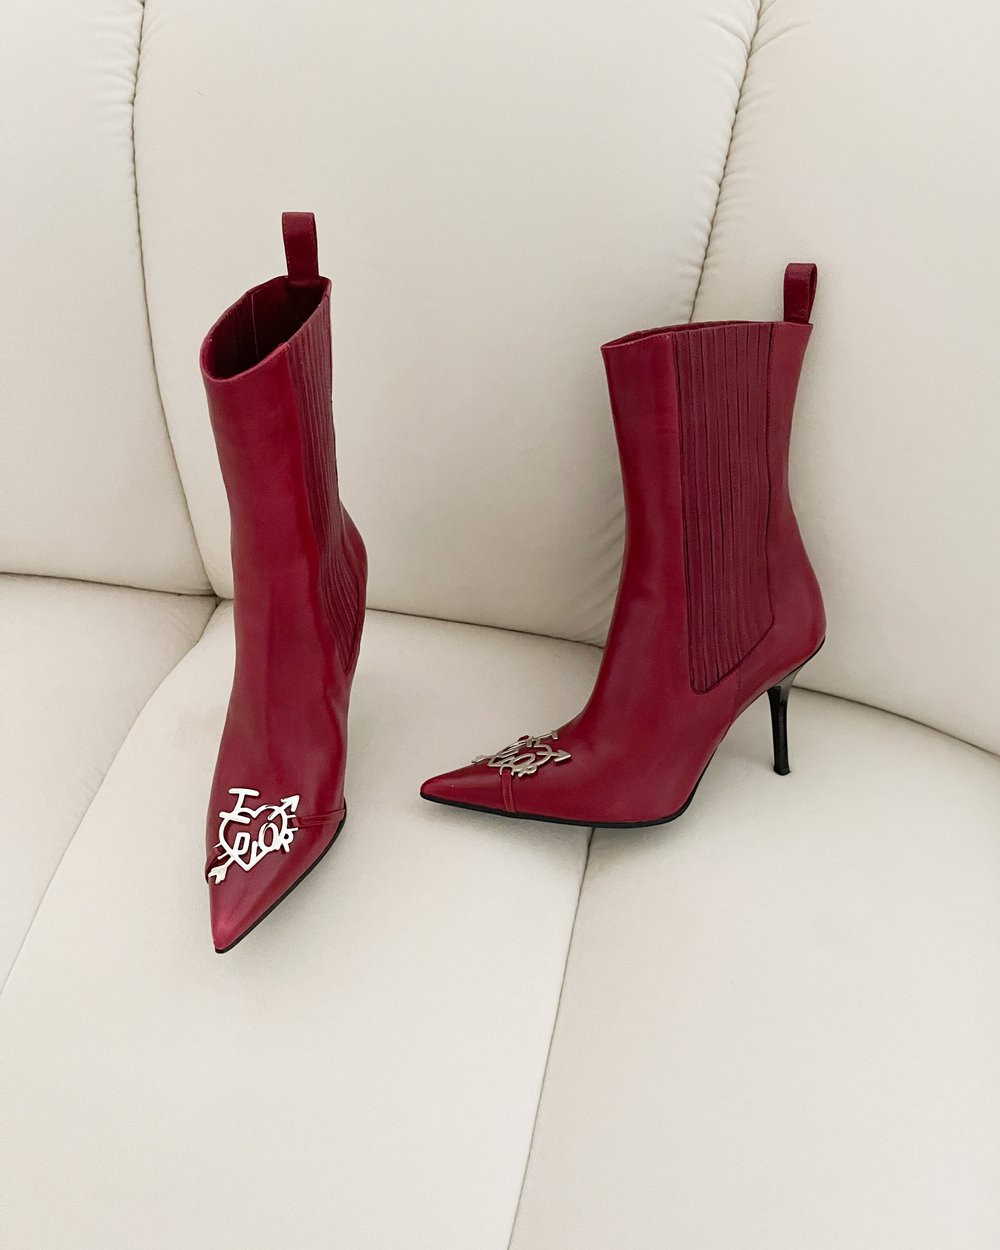 Christian Dior by John Galliano 2000's I HEART DIOR Iconic Leather Boot  Heels (US 7 / IT 38) — sororité.